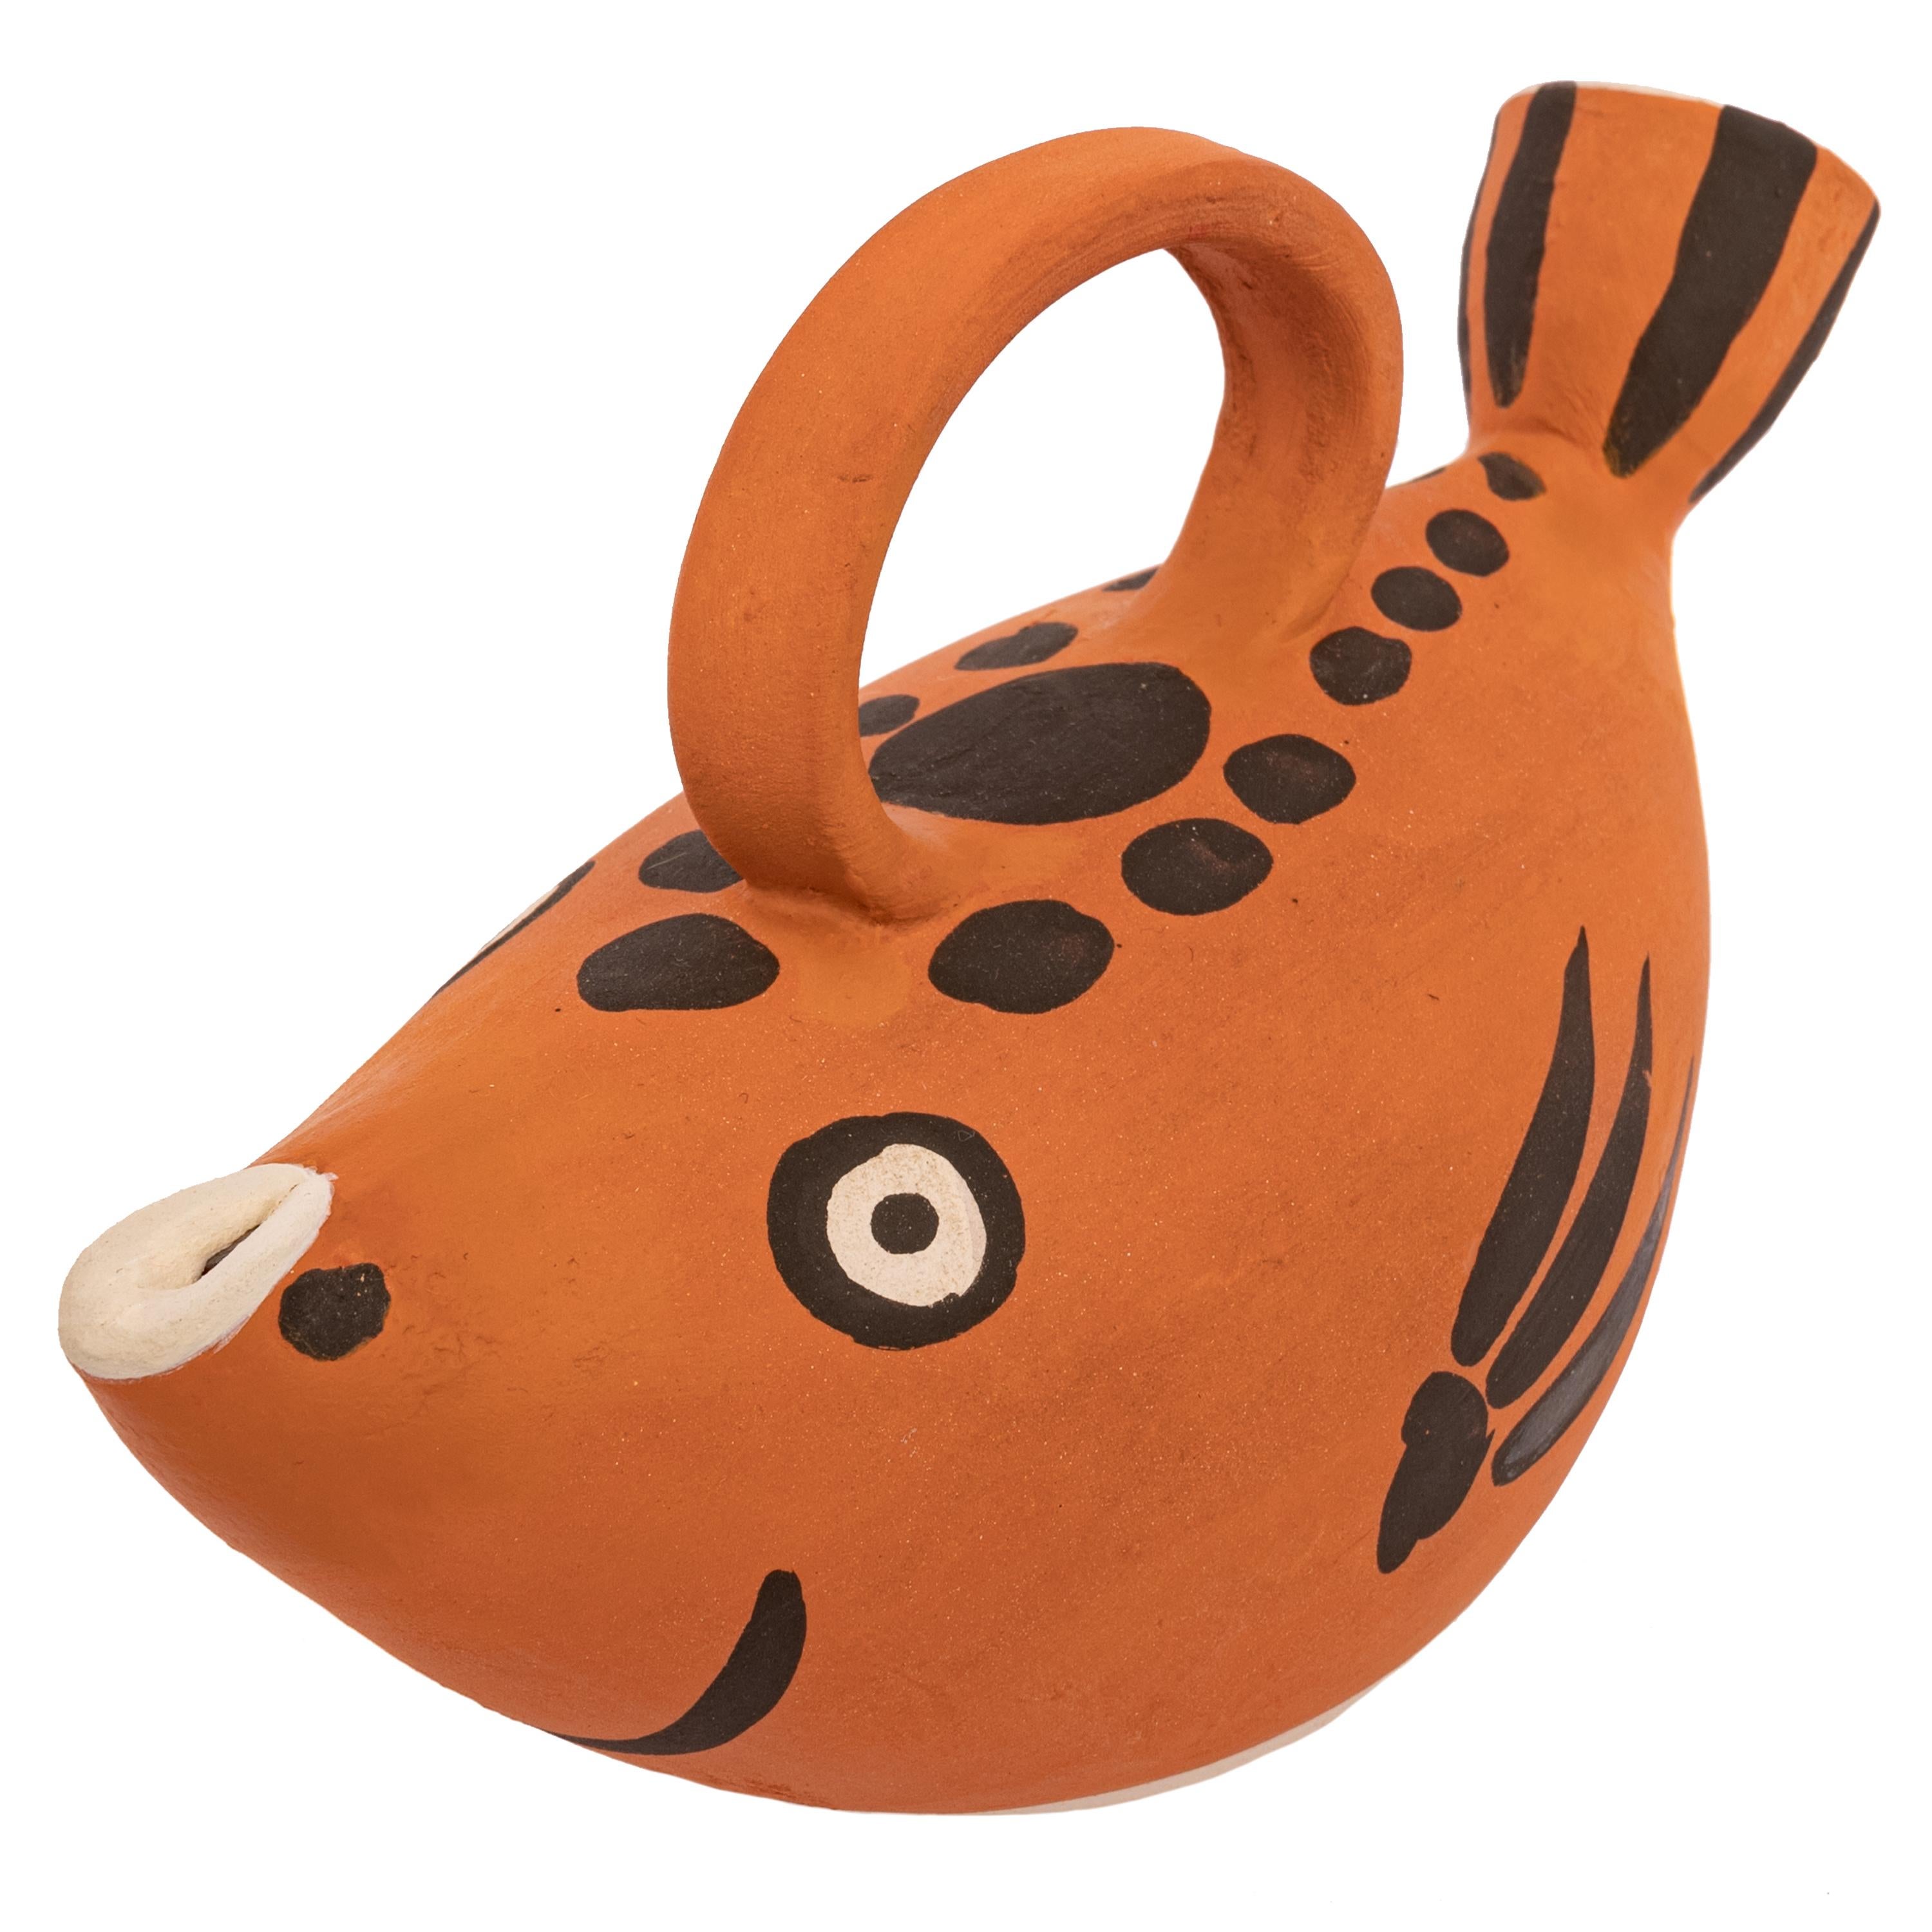 Pablo Picasso (1881-1973), terracotta fish pitcher. Madoura pottery 1952.
This original terracotta fish pitcher was created by Picasso in 1952 and was produced by Madoura Pottery workshop located in Southern France. There were two versions of this